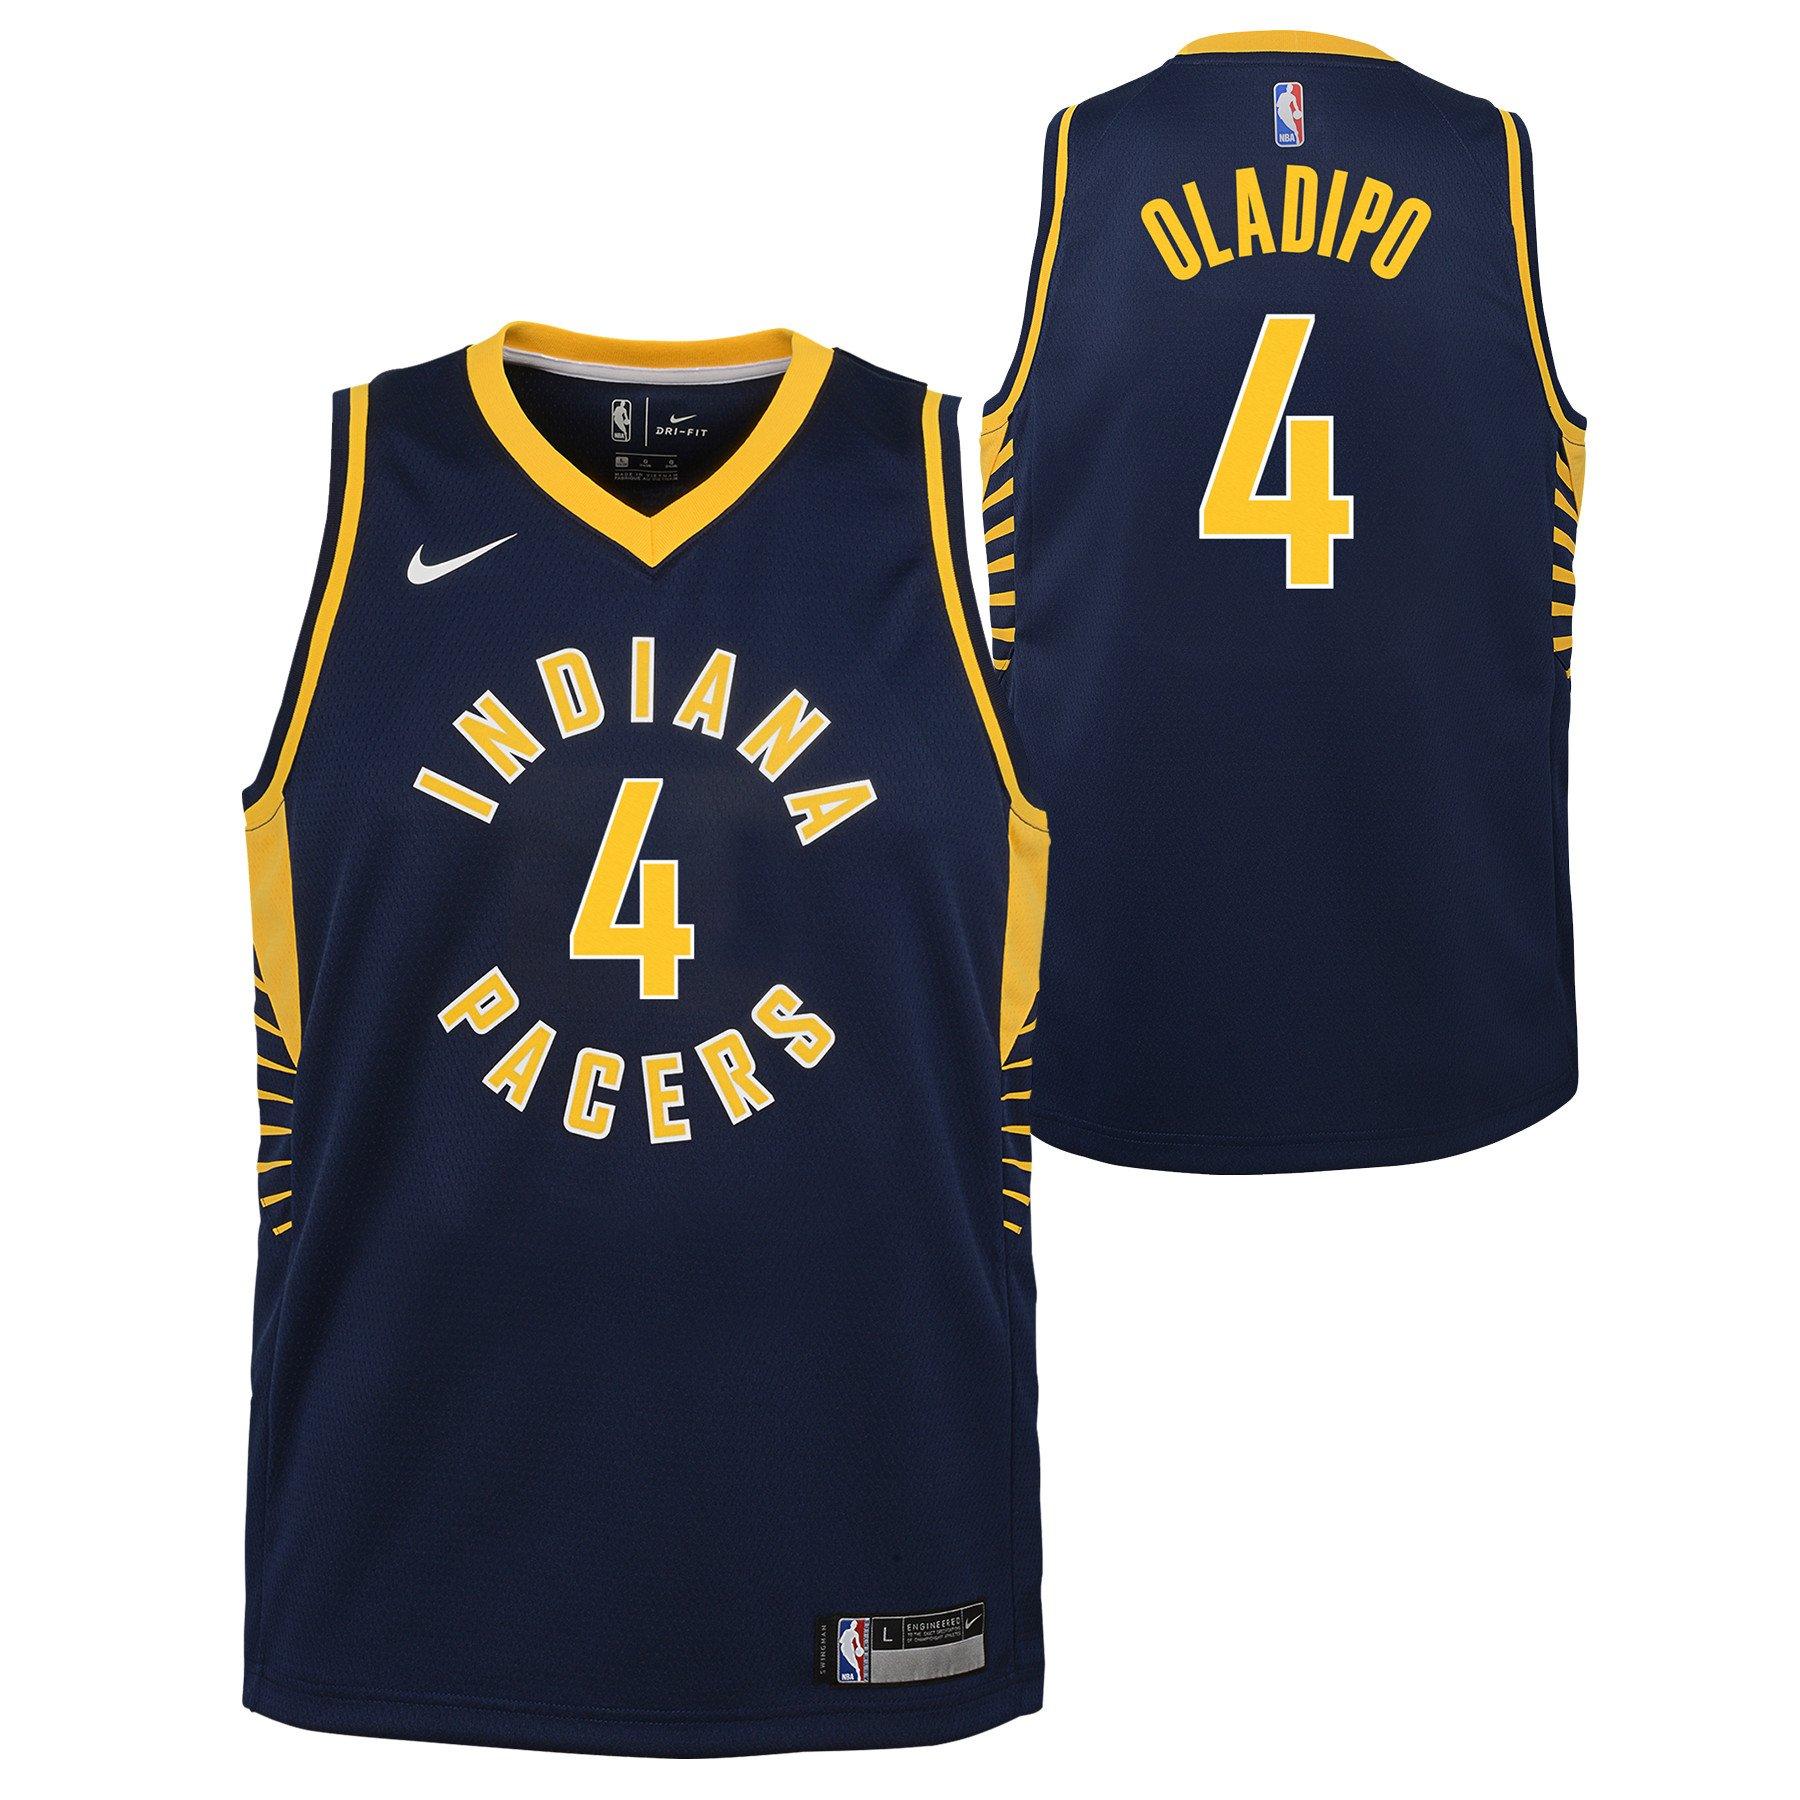 oladipo pacers jersey